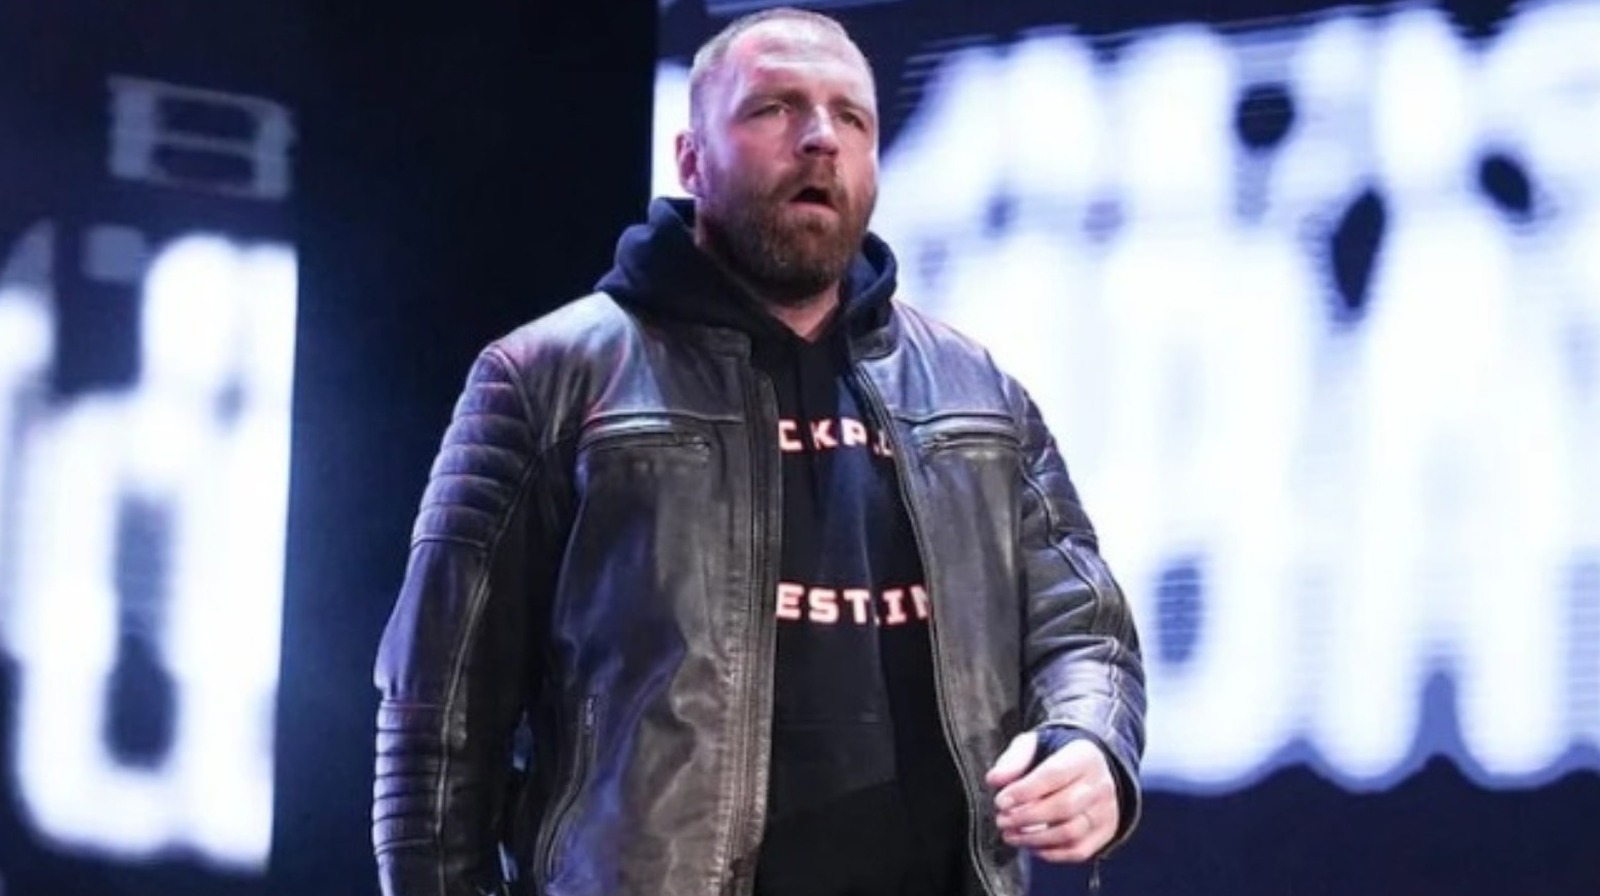 Jon Moxley Not Cleared For Dynamite, AEW Reportedly Knew Hours Before ...